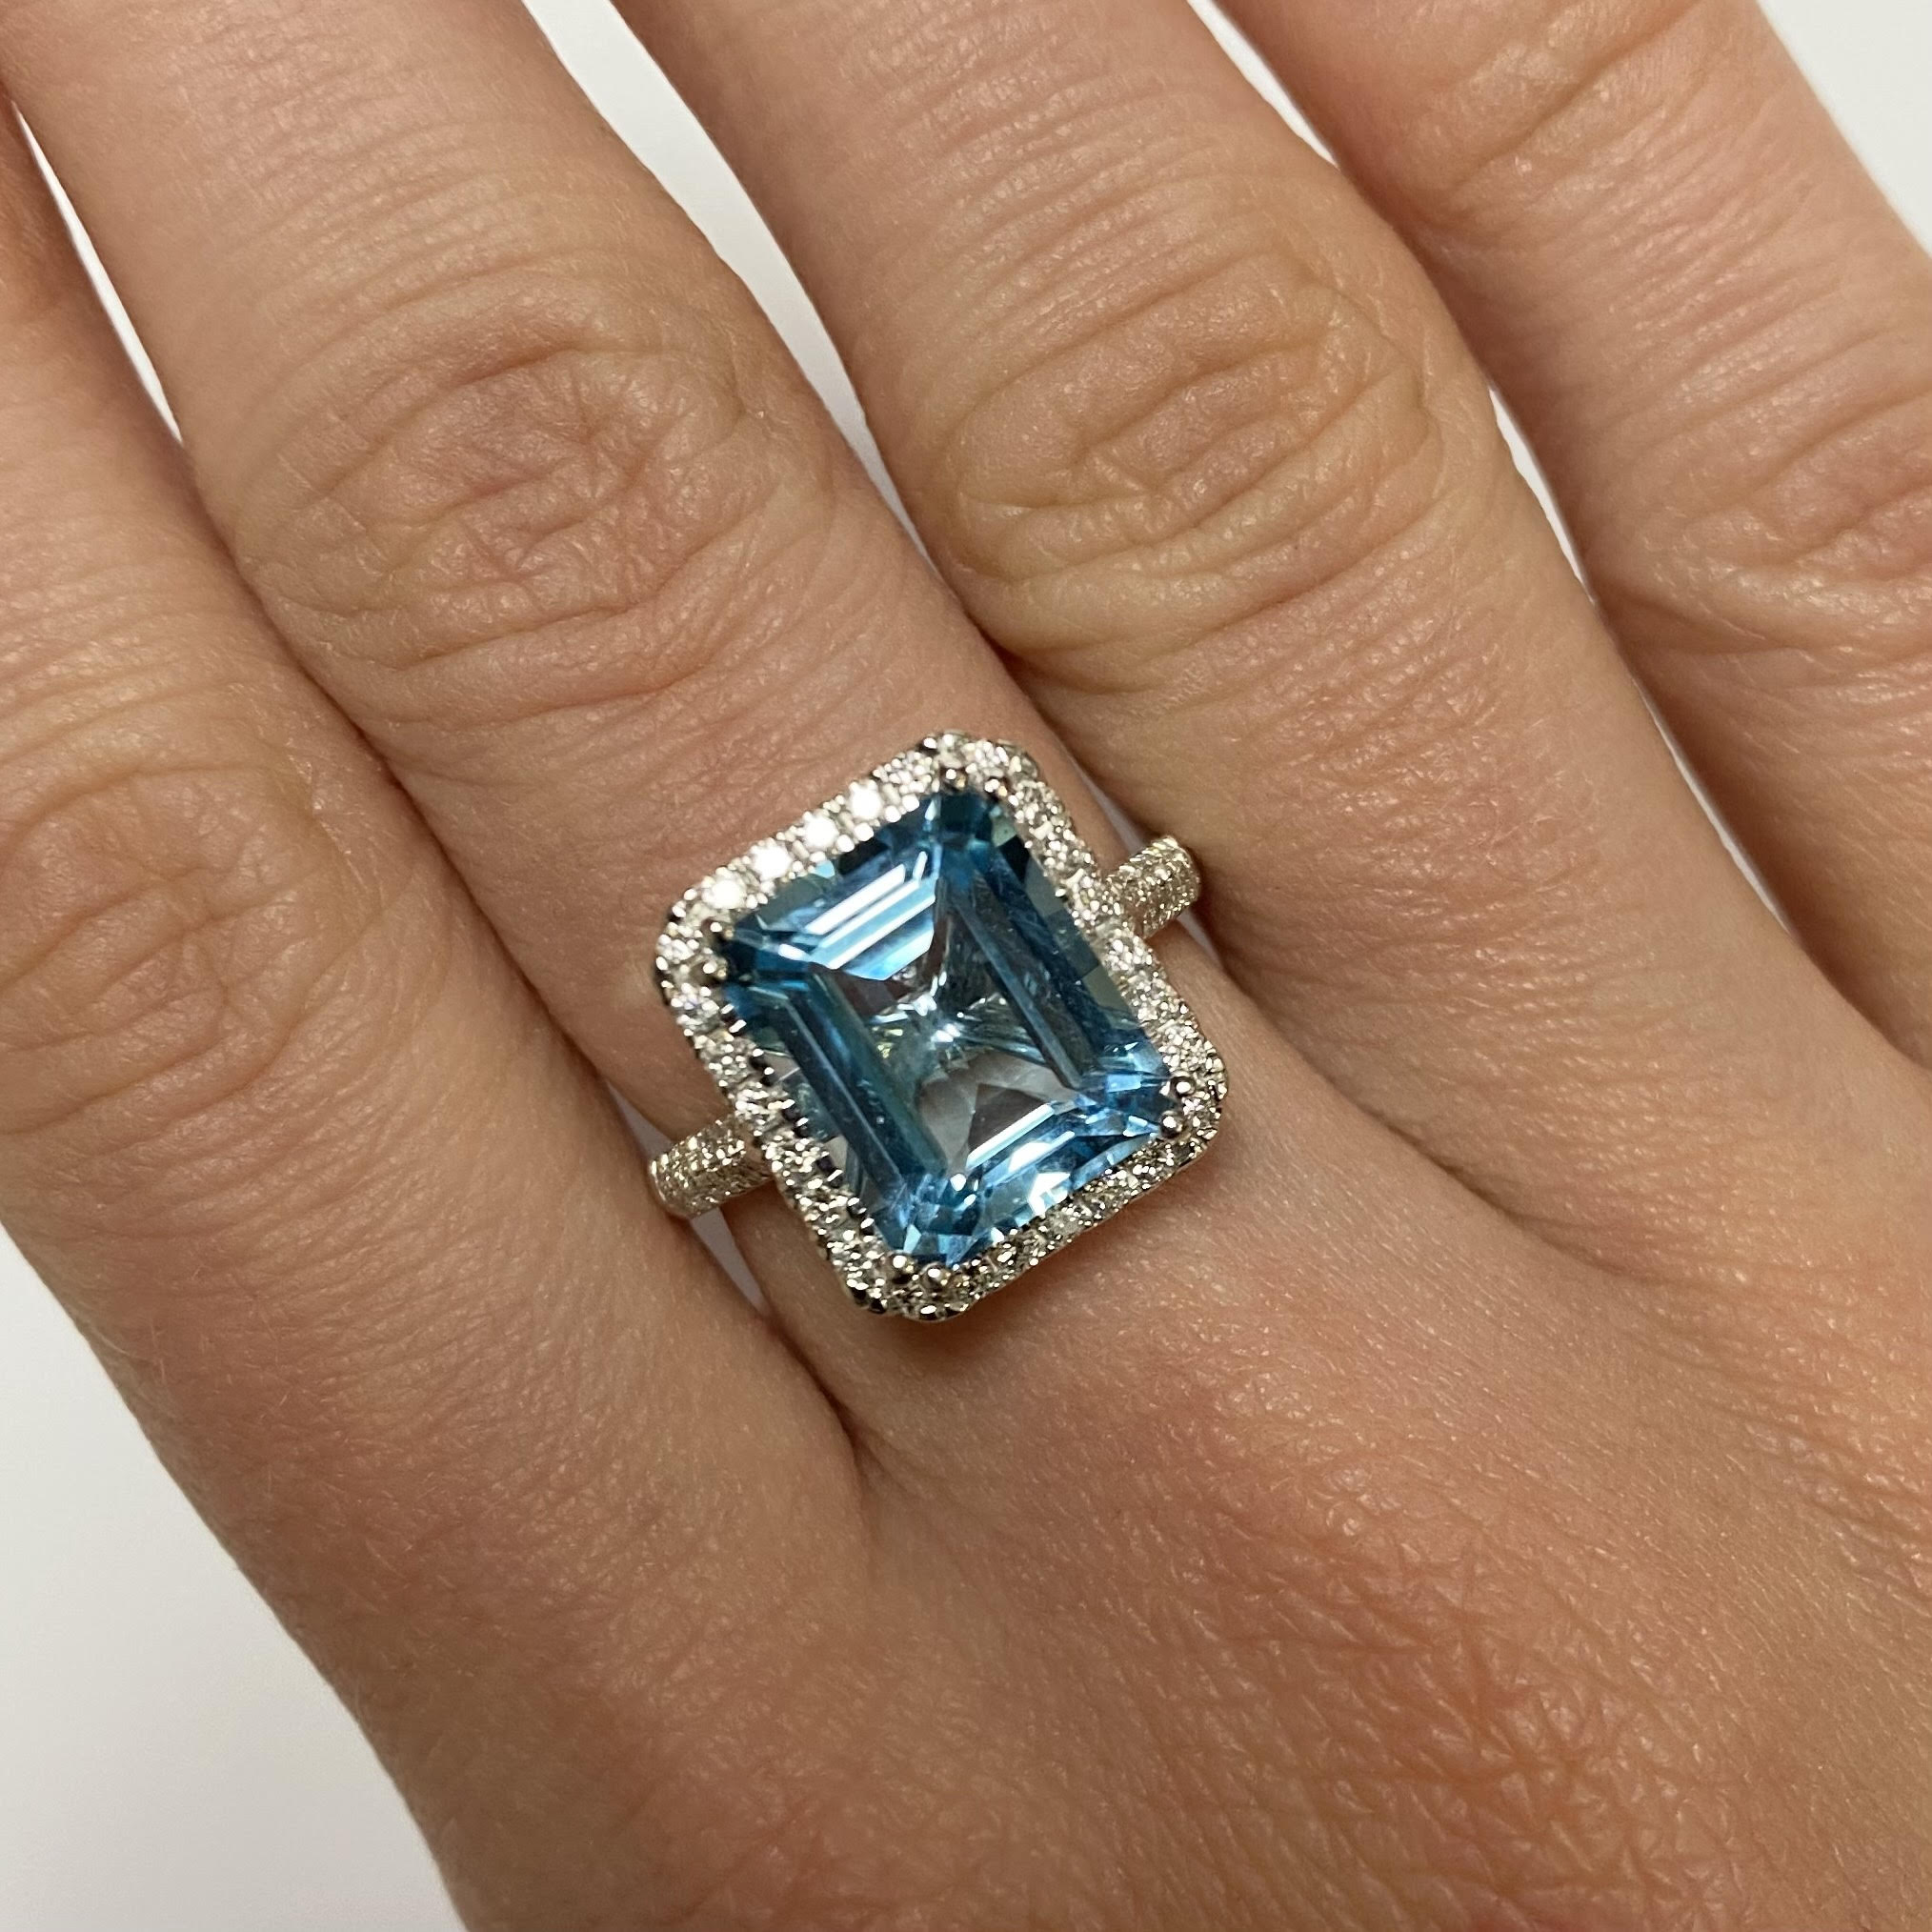 Enchanted Disney Cinderella Princess-Cut London Blue Topaz and 3/8 CT. T.W. Diamond  Engagement Ring in 14K White Gold | Zales